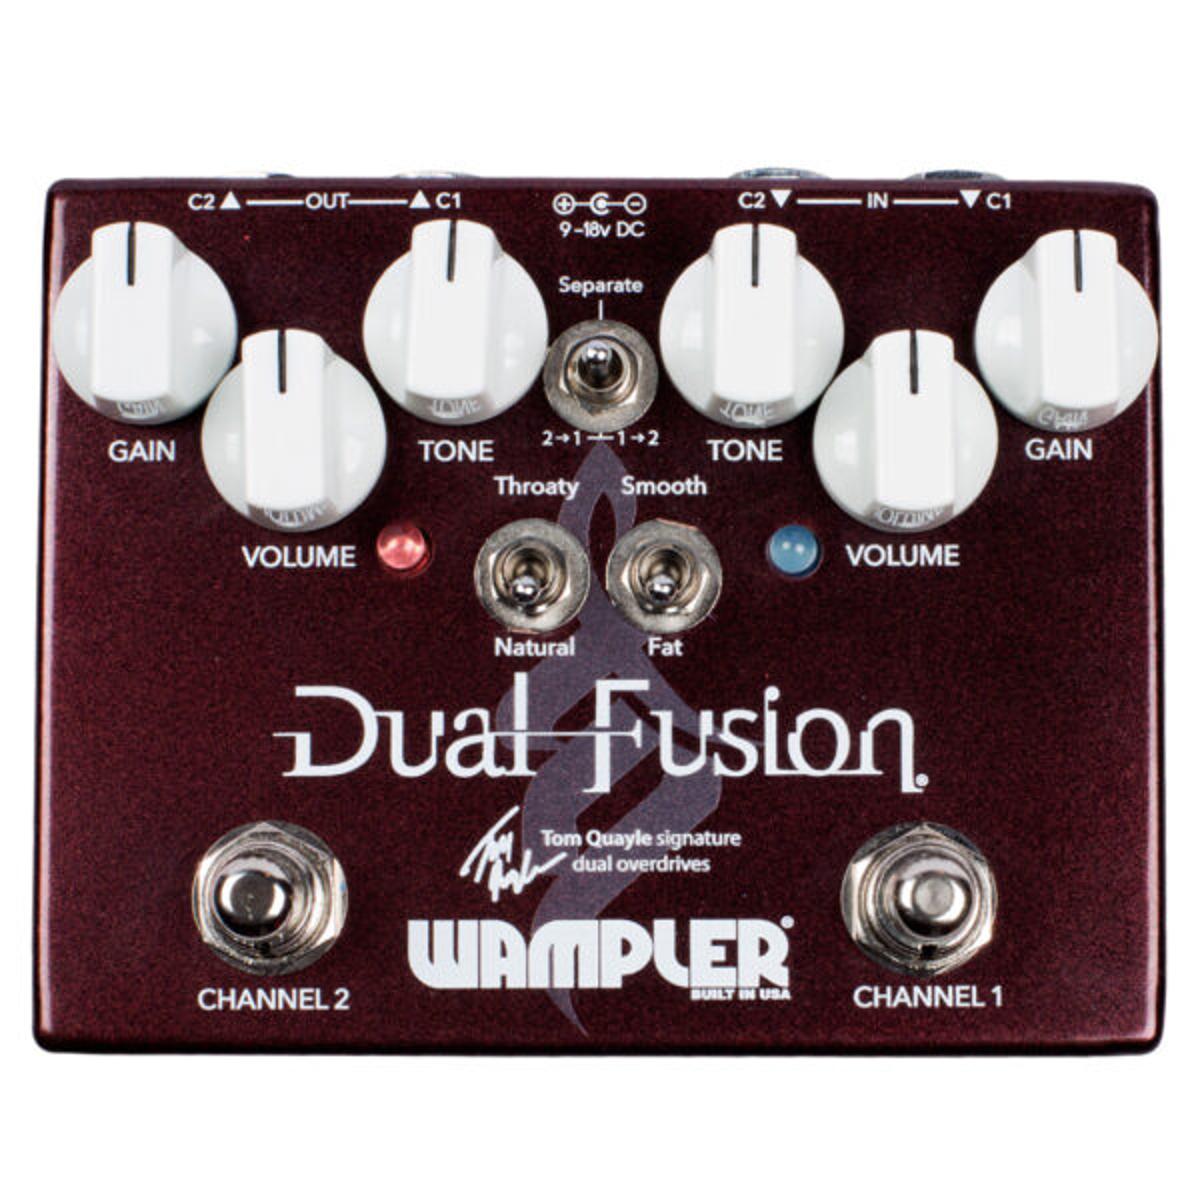 Wampler Dual Fusion Tom Quayle Signature Overdrive Dual Effects Pedal